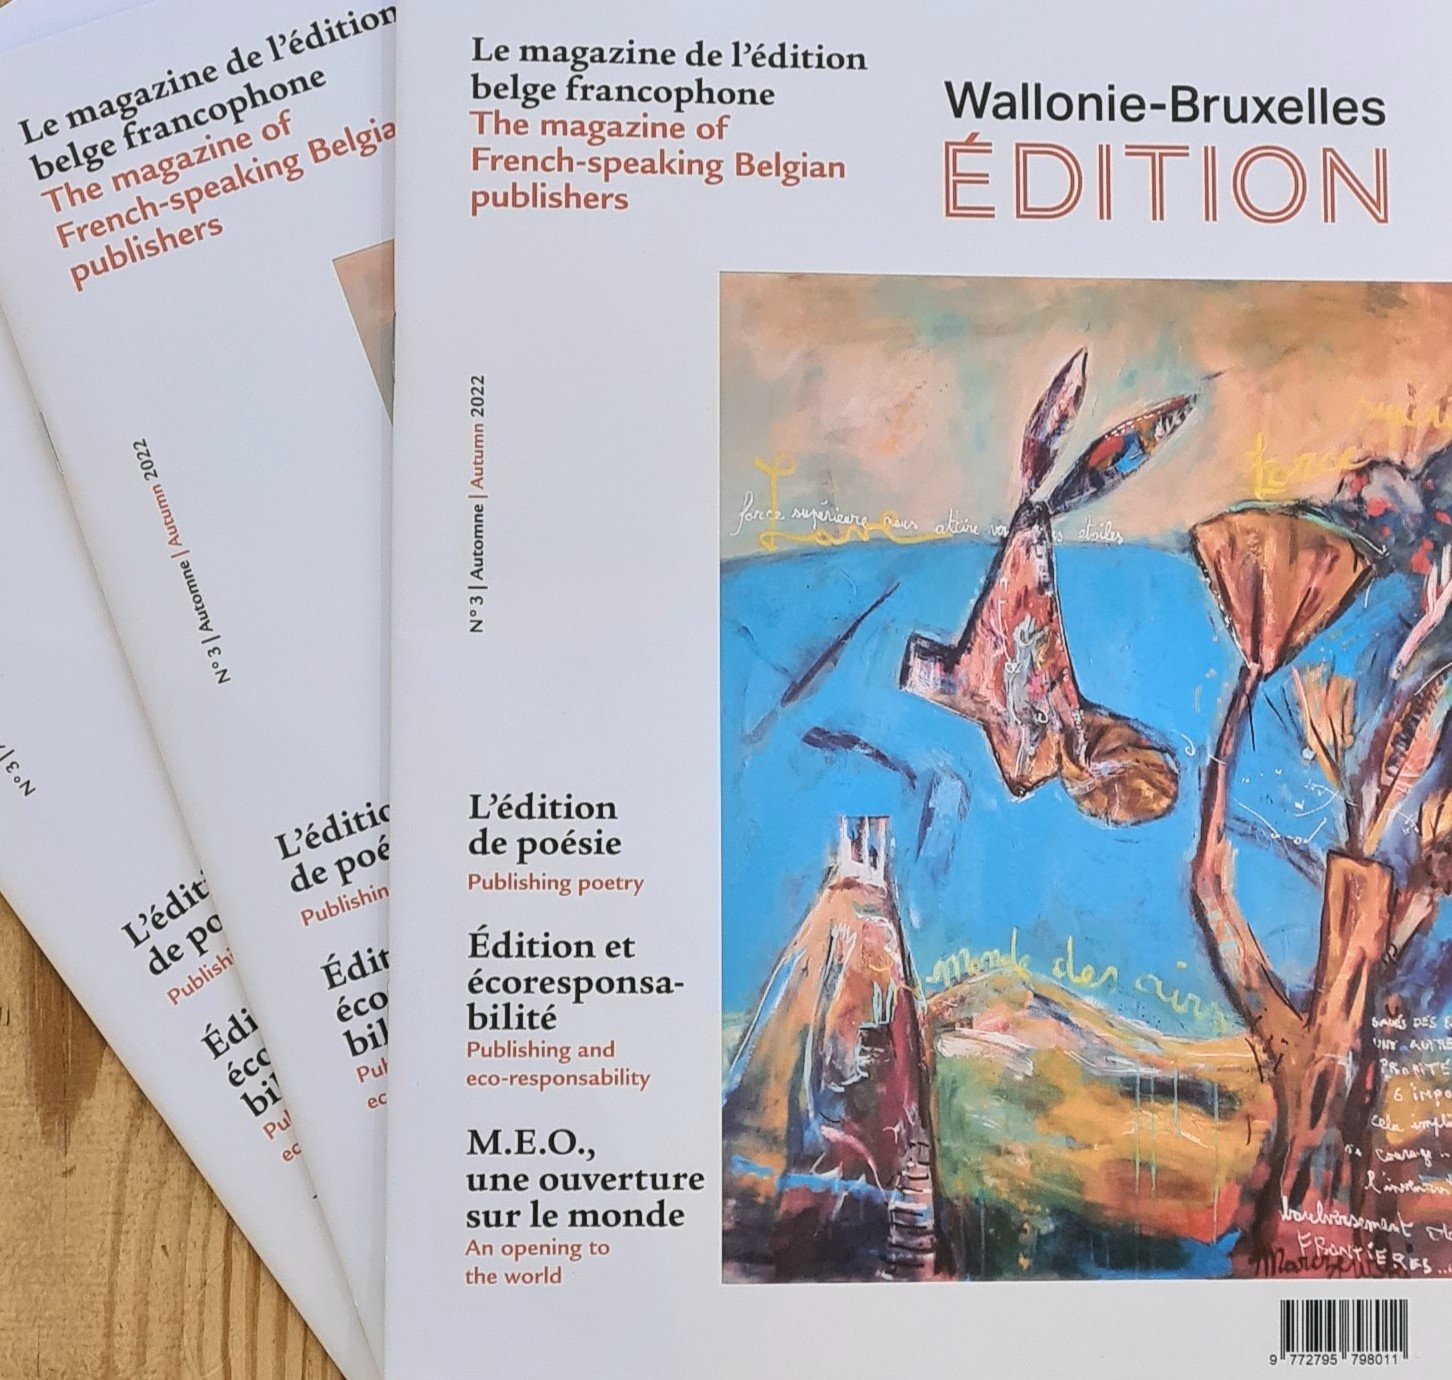 The magazine Wallonie-Bruxelles Édition n°3 has been published